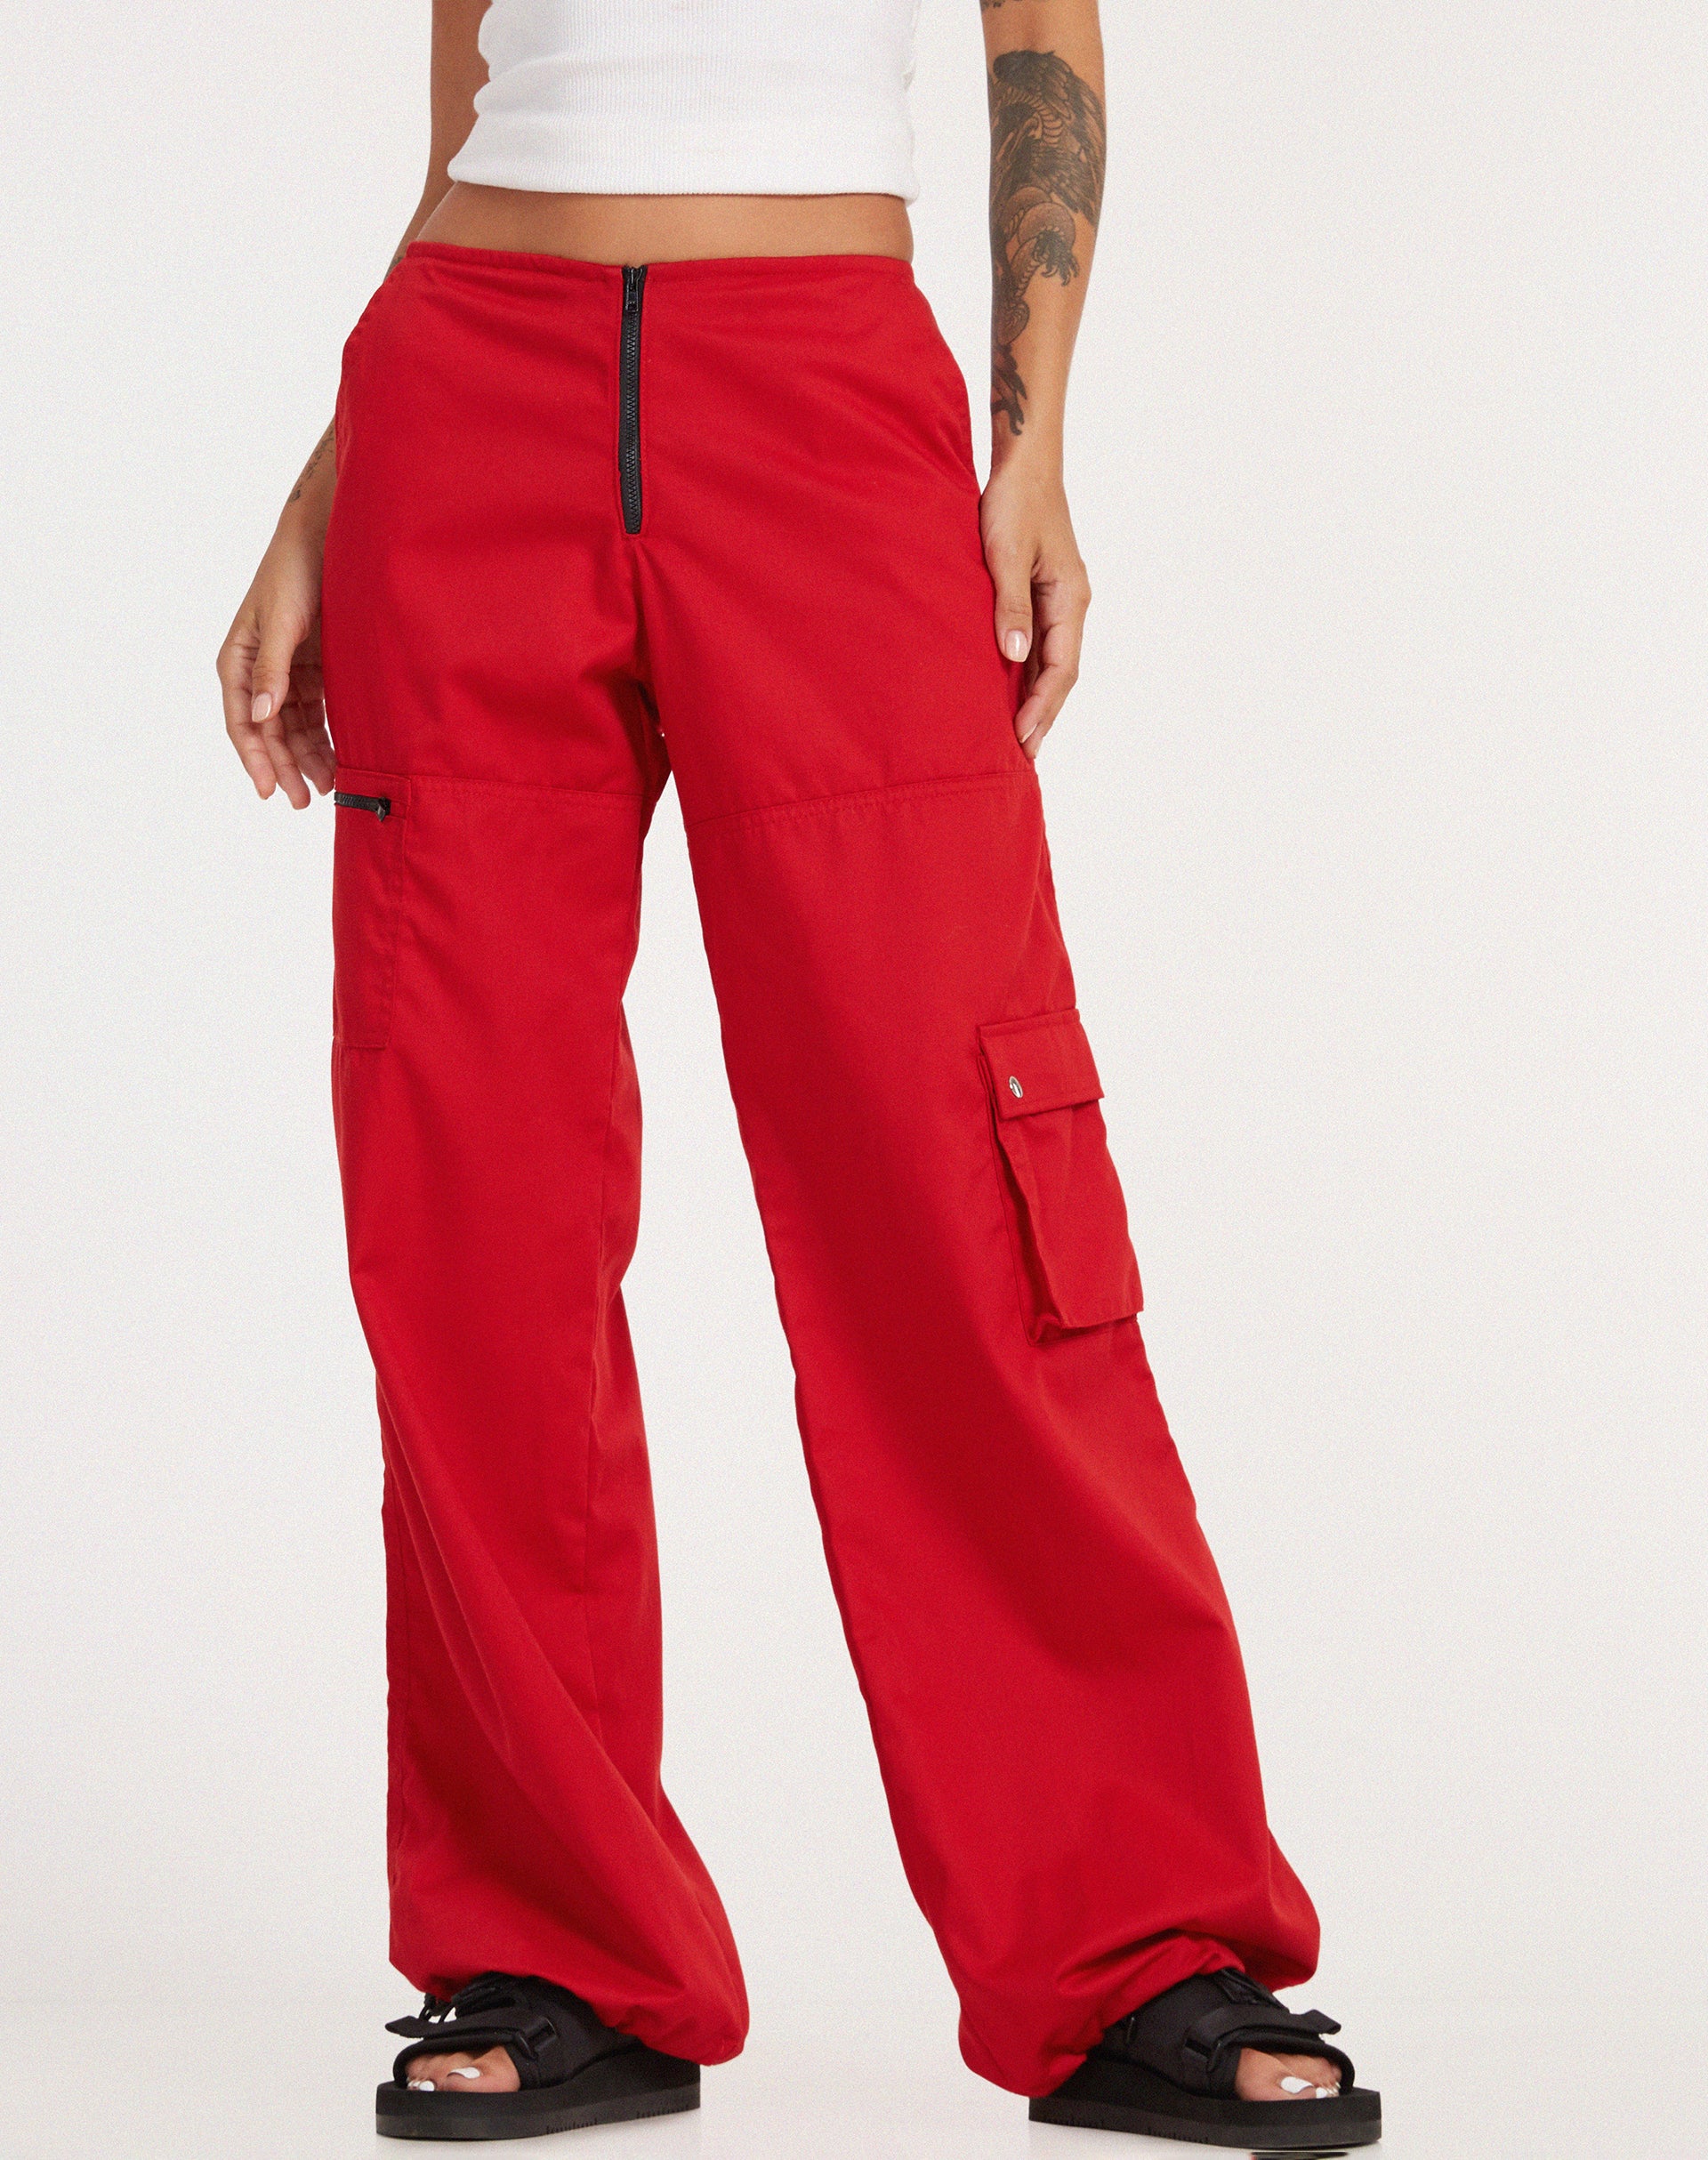 Petite Red Pocket Detail Cargo Pants  Pants for women Red cargo pants  Clothes